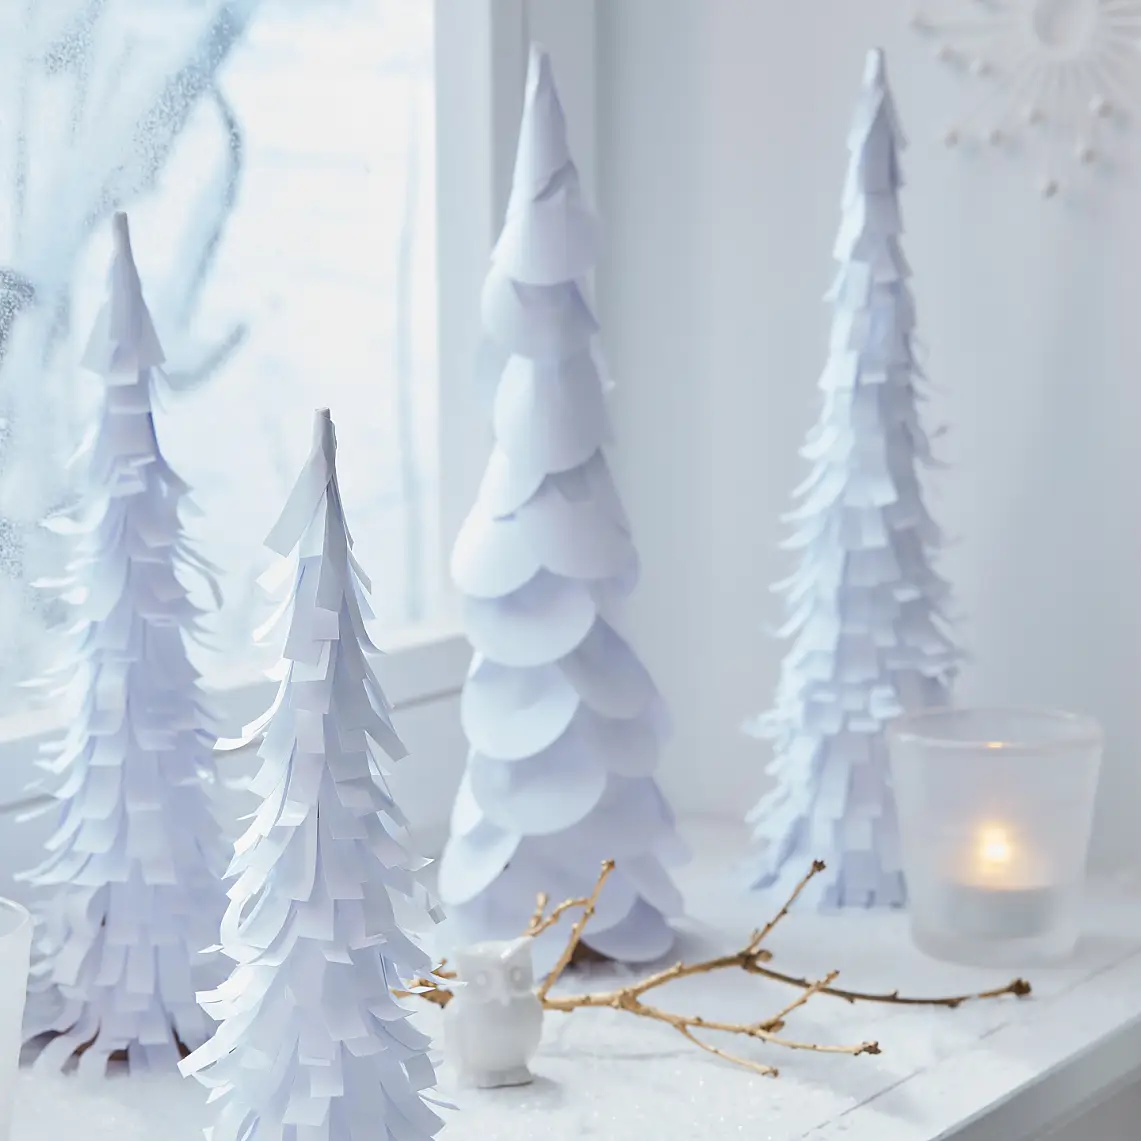 Many white paper trees on the windowsill bring the winter wonderland into your house, even if it's not snowing outside.